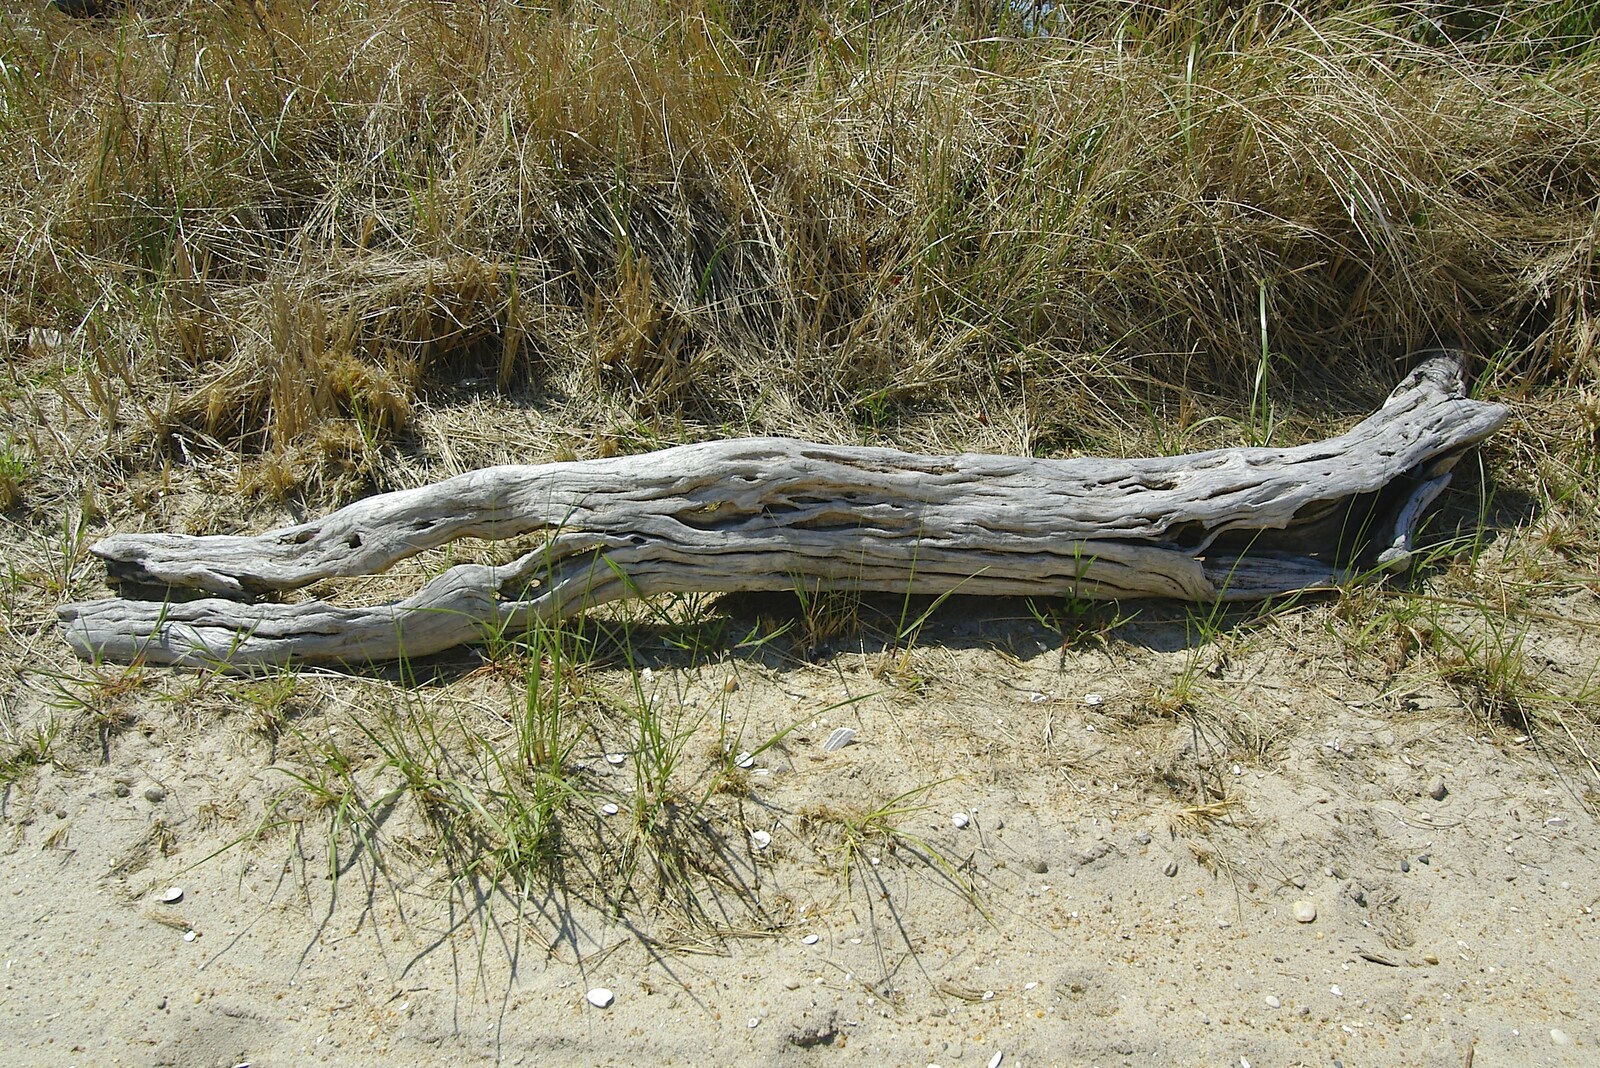 A dead branch from Phil and the Fair Harbor Fire Engine, Fire Island, New York State, US - 30th April 2006